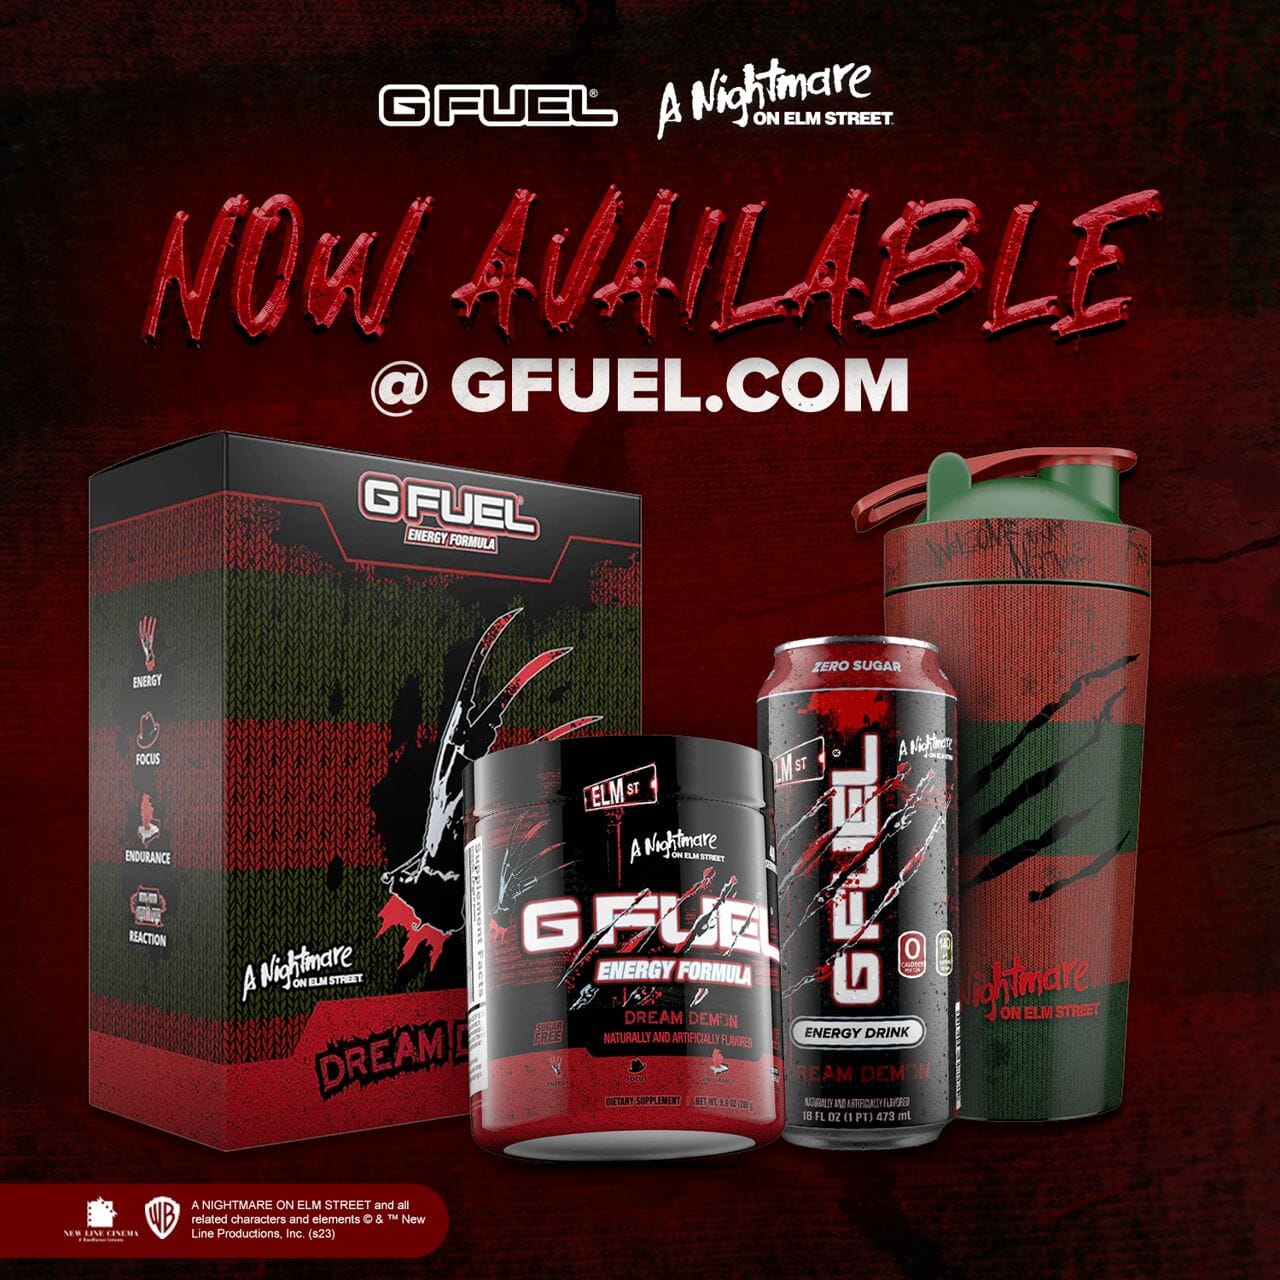 G FUEL Dream Demon, Inspired by "A Nightmare on Elm Street"